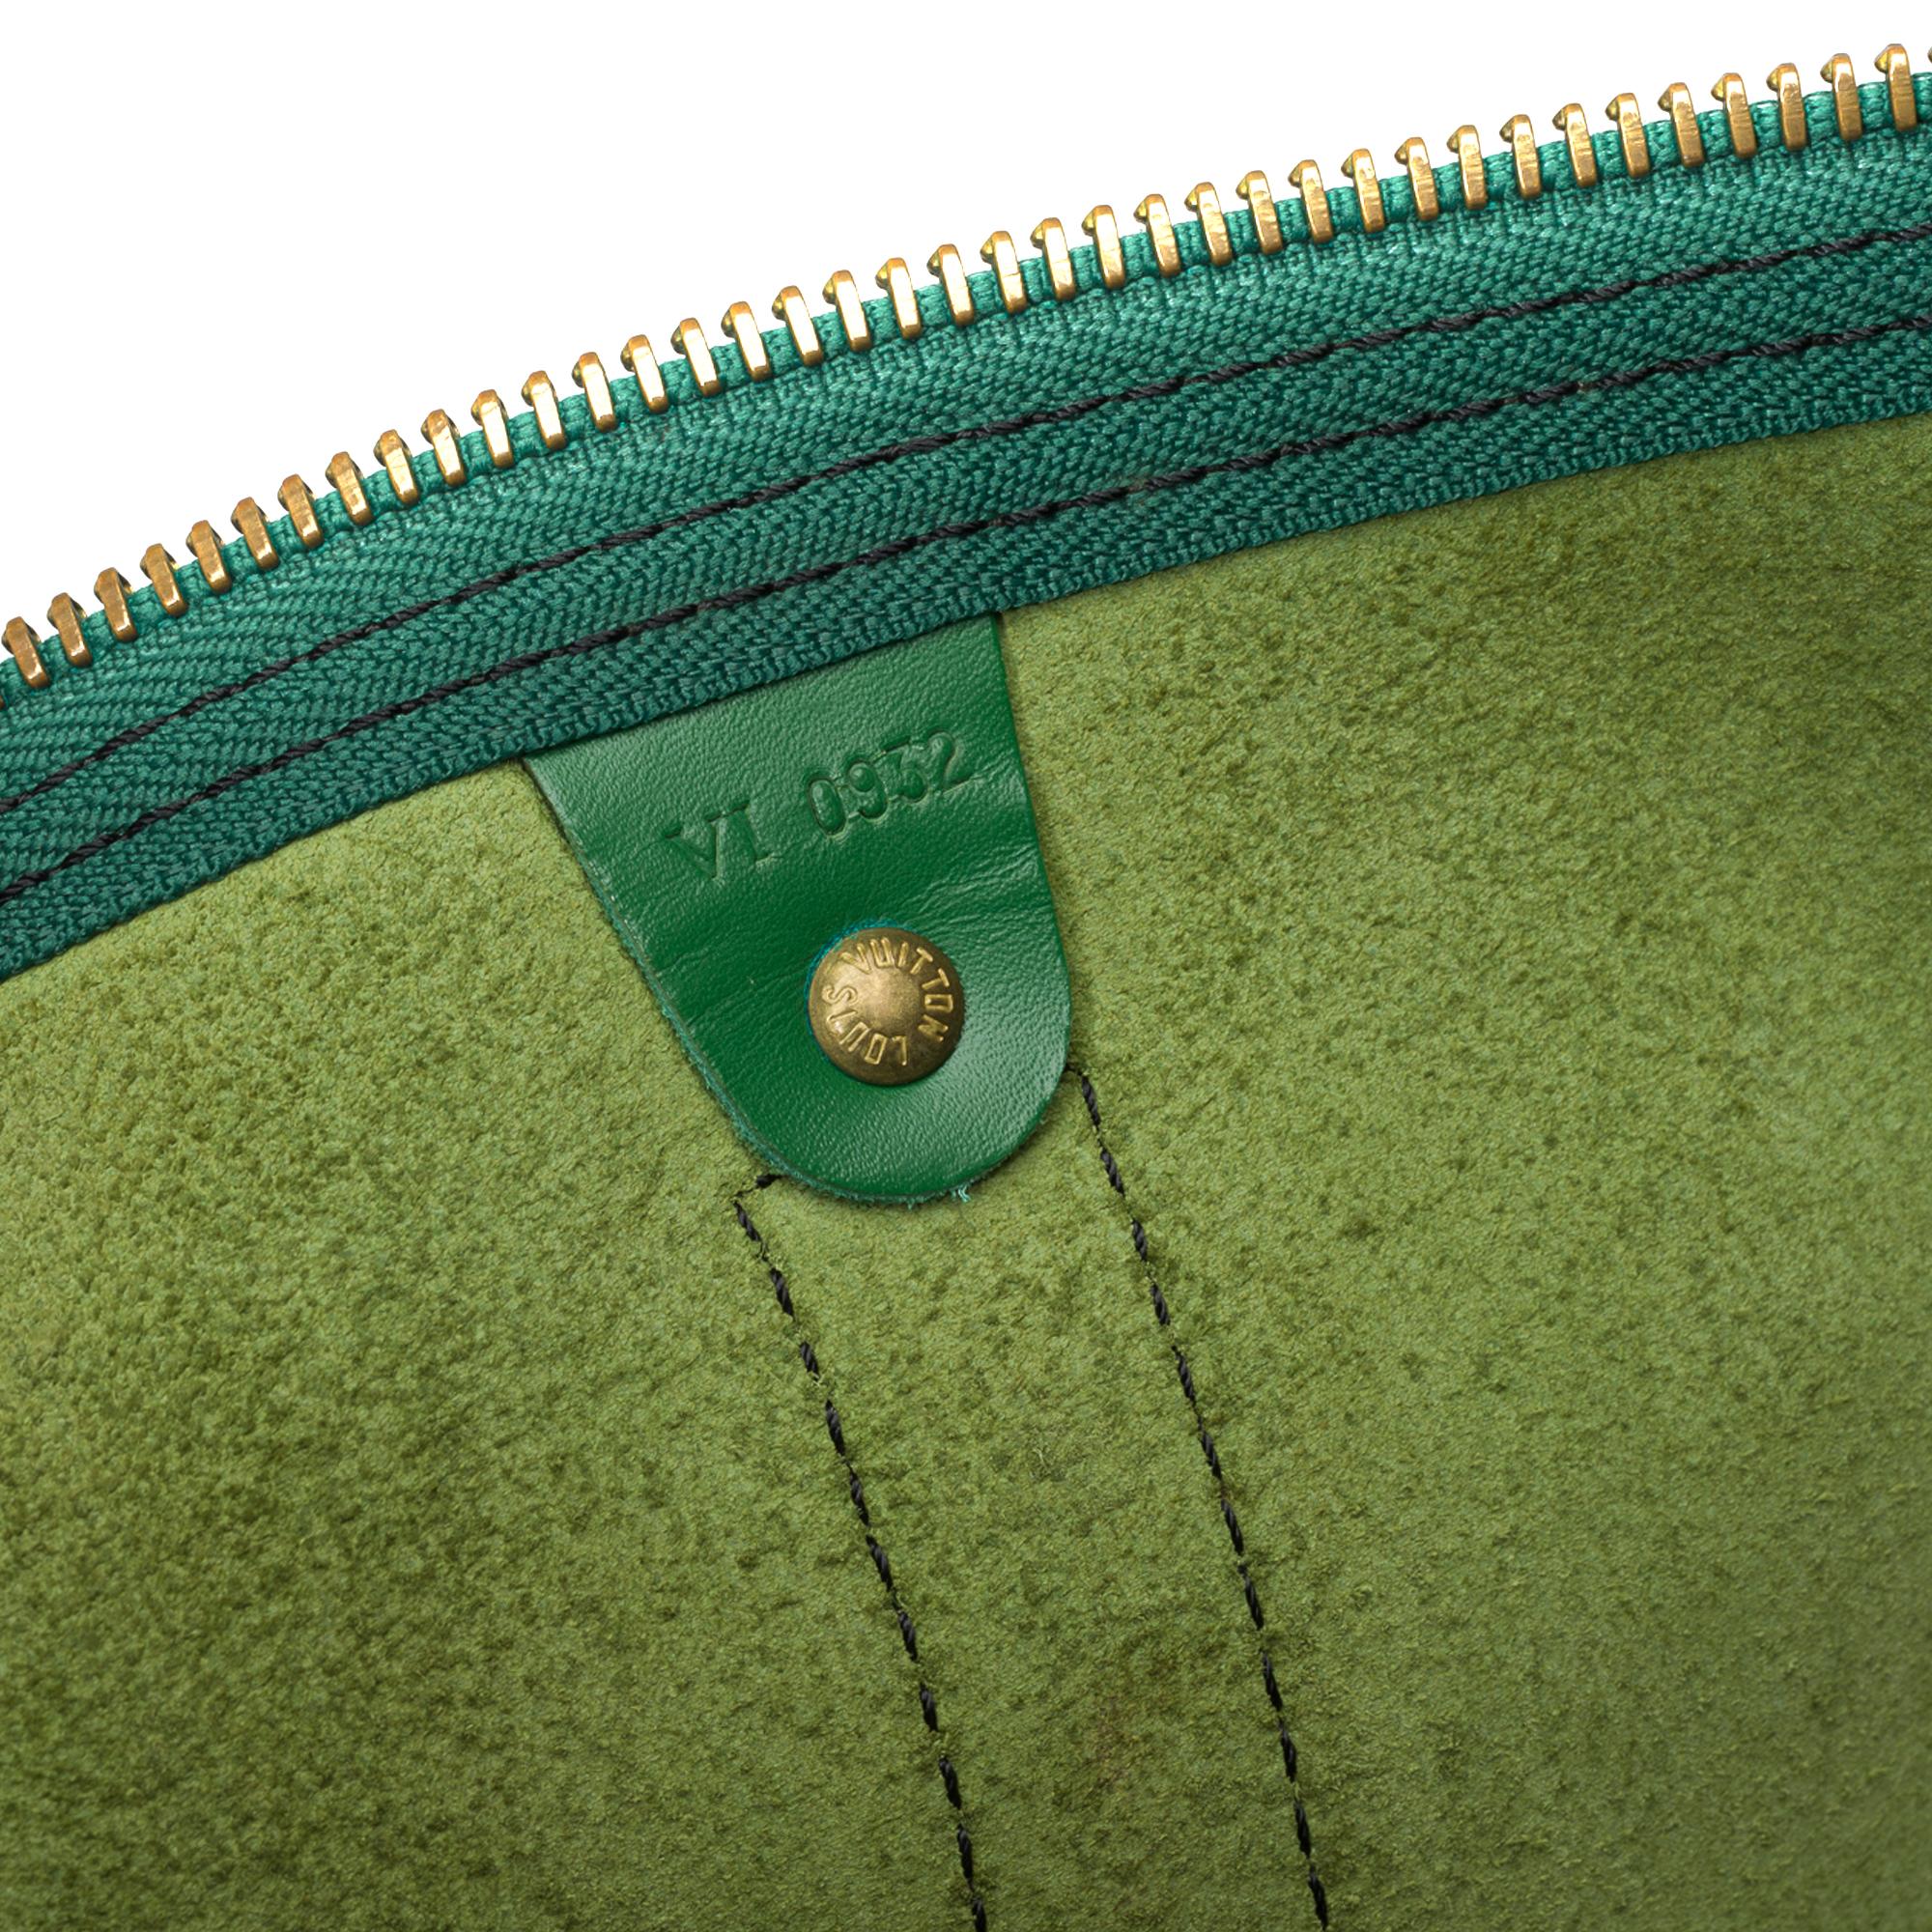 Louis Vuitton Keepall 50 Travel bag in Green épi leather, GHW 3